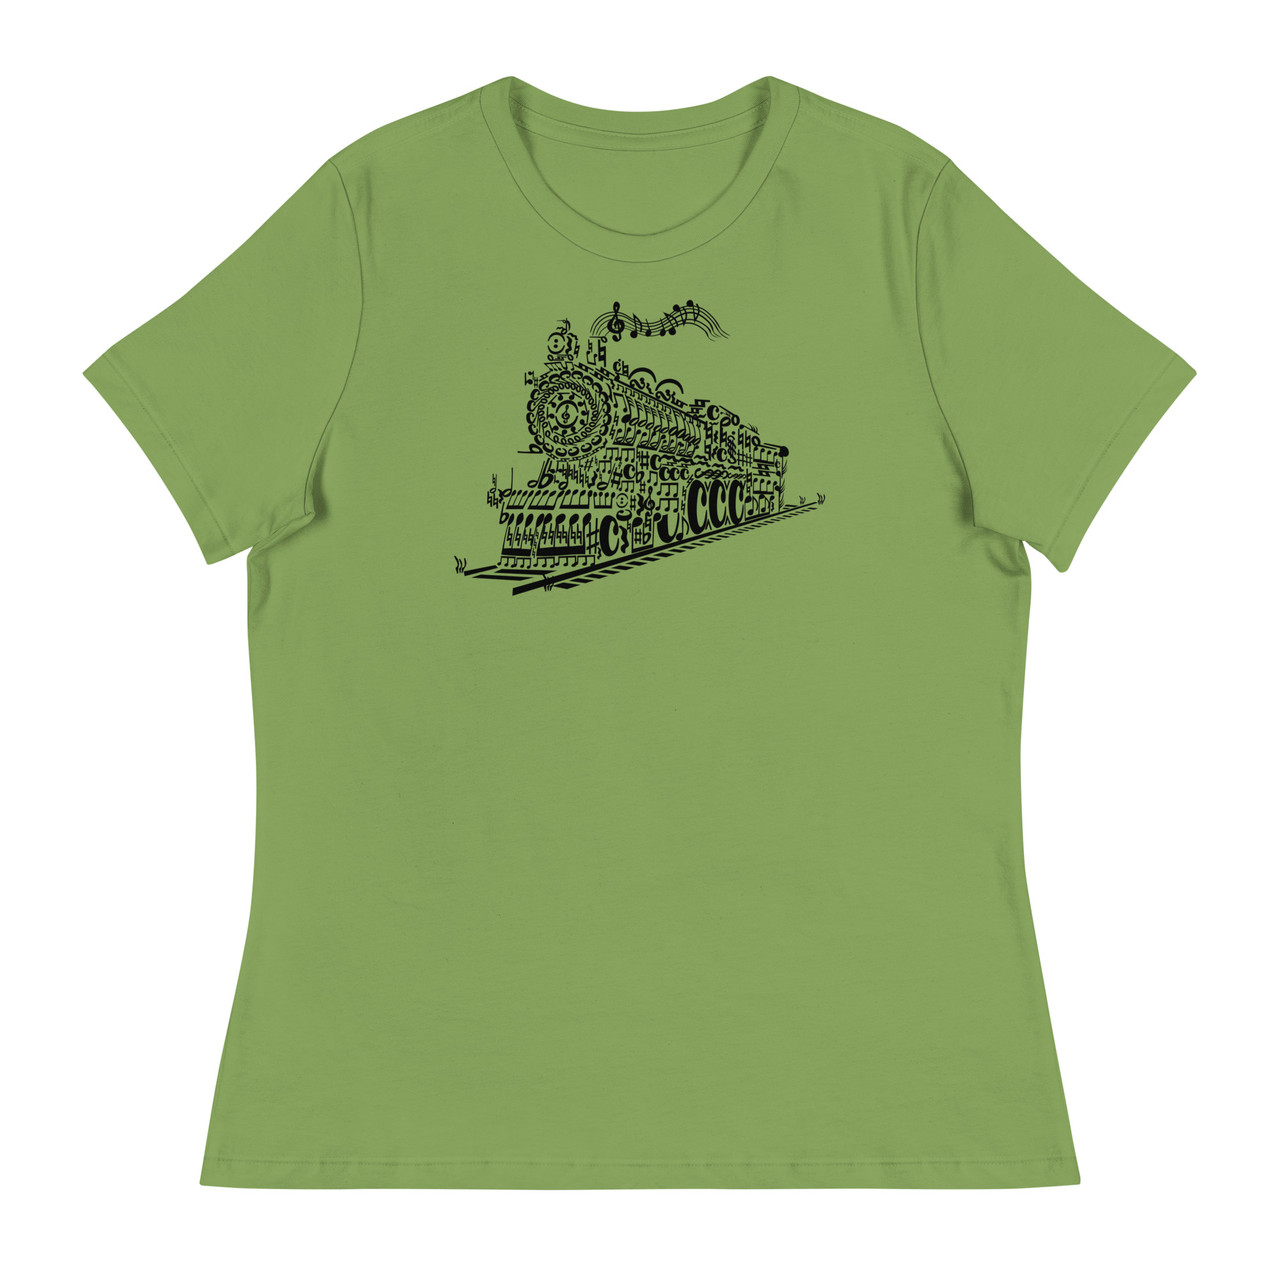 Leaf Song Train Women's Relaxed T-Shirt - Bella + Canvas 6400